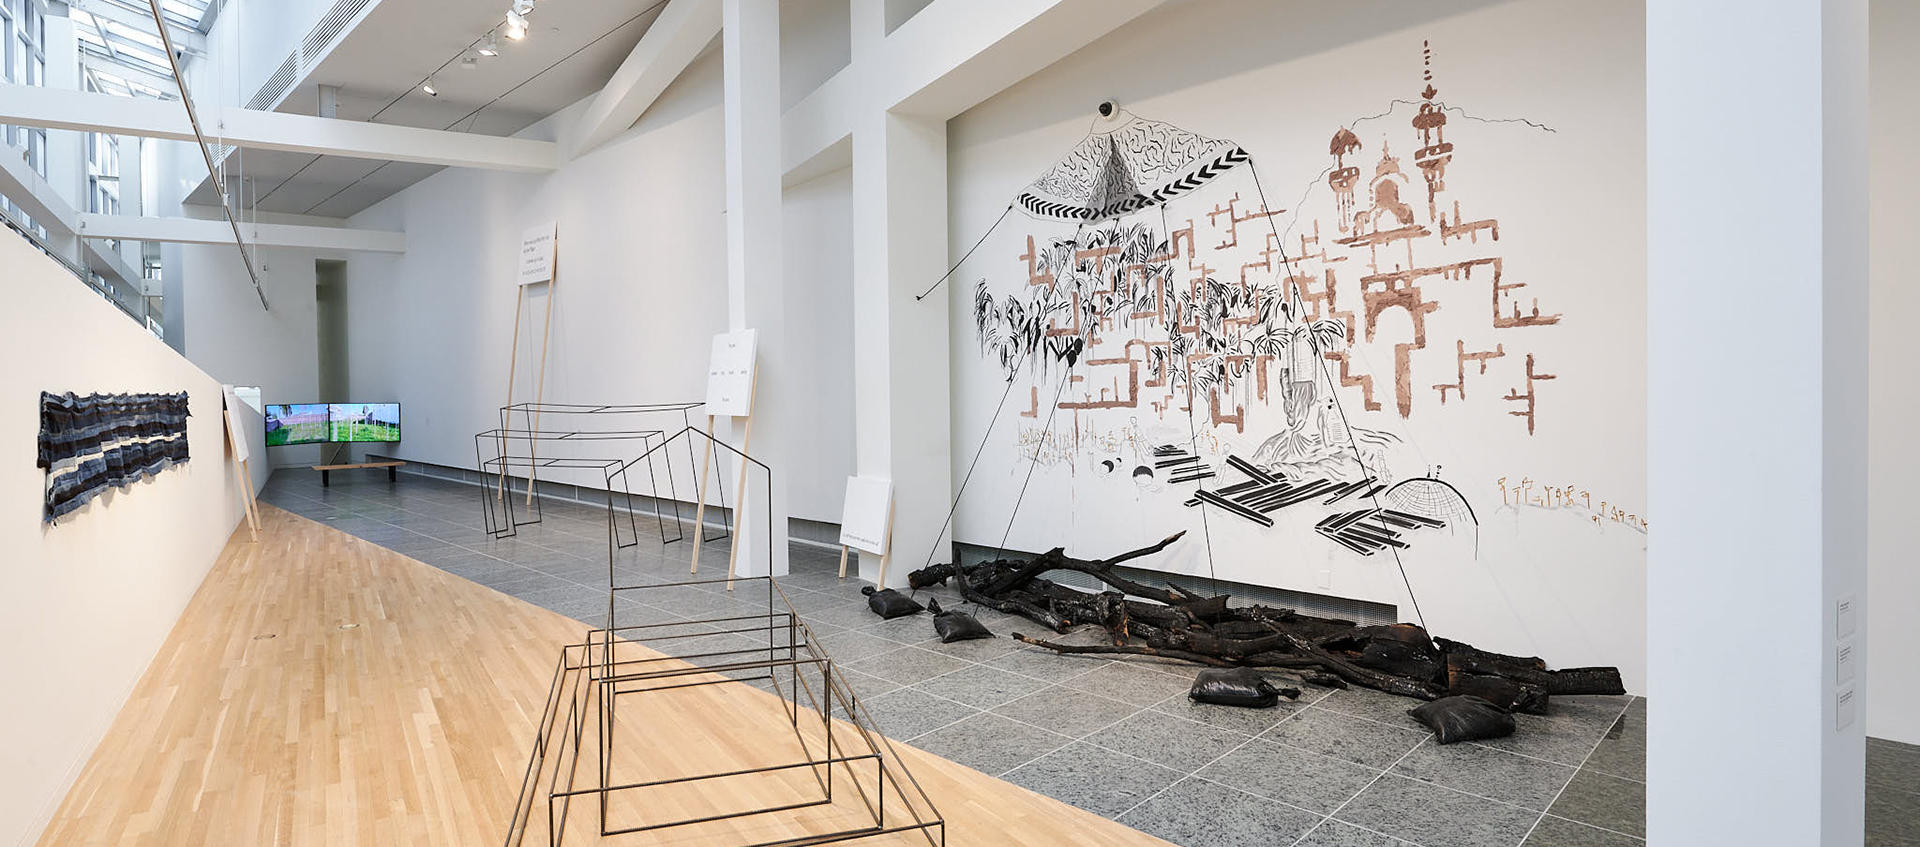 Metal sculptures and burnt tree branches are on the floor of a gallery space featuring white beams. Works are painted and hung on the walls. A video plays in the background.